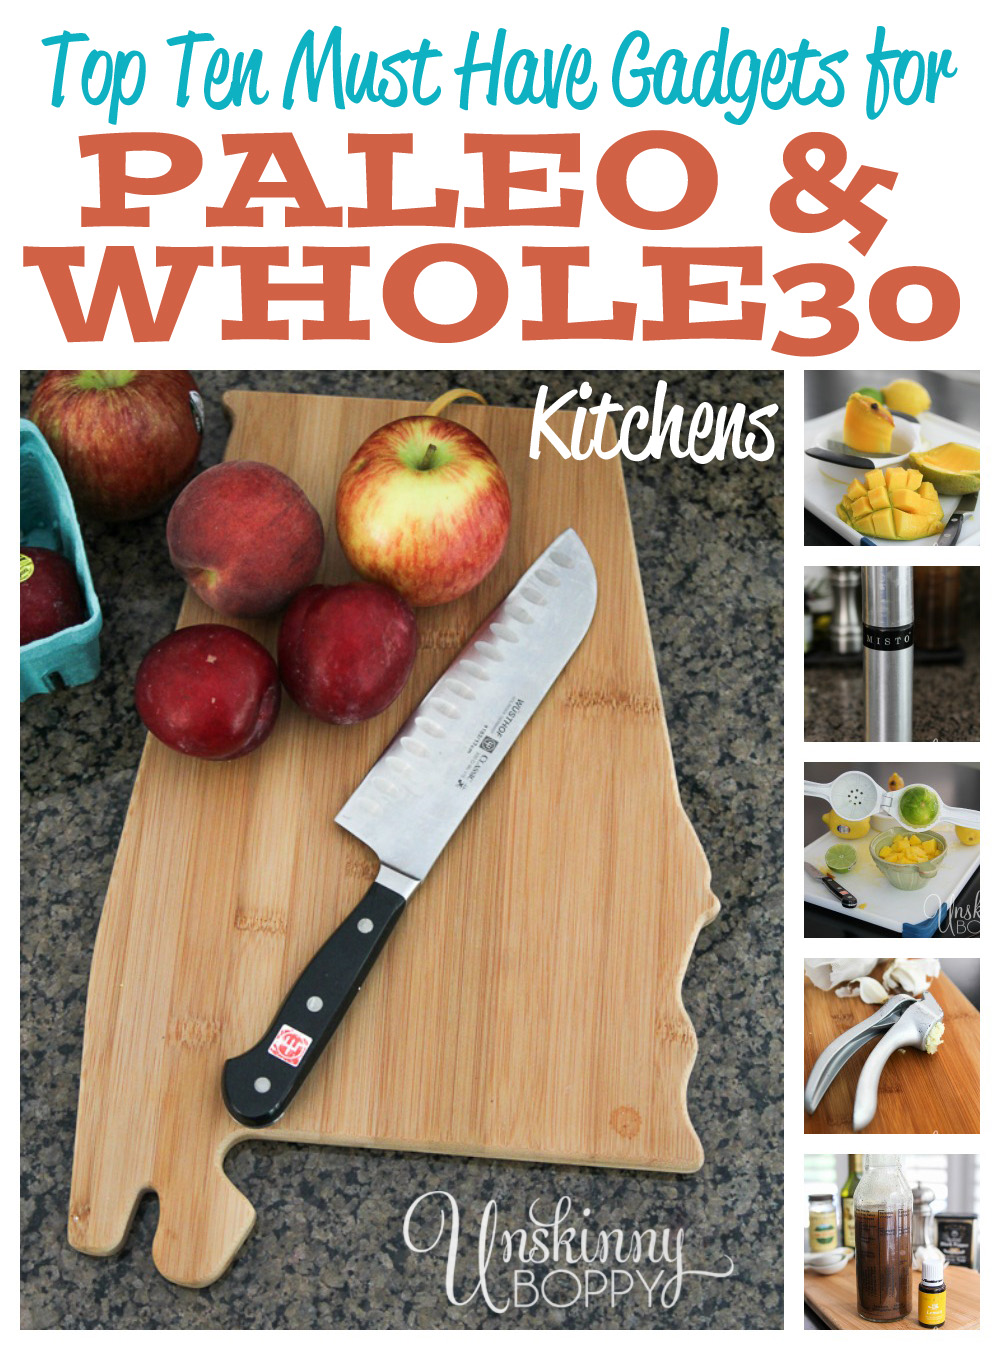 Ten Best Gadgets for Whole30 and Paleo Kitchens - Beth Bryan